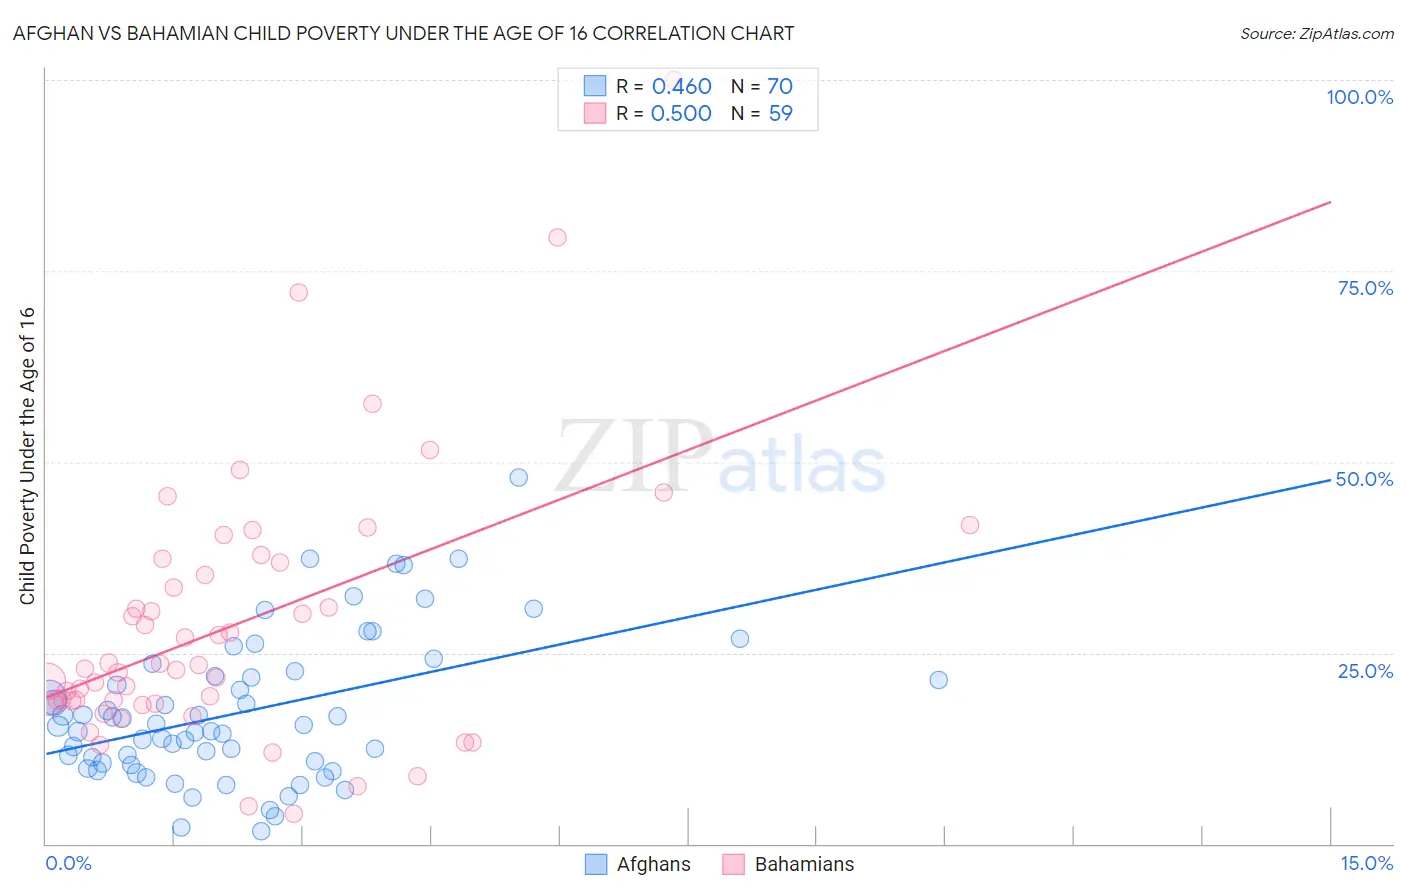 Afghan vs Bahamian Child Poverty Under the Age of 16